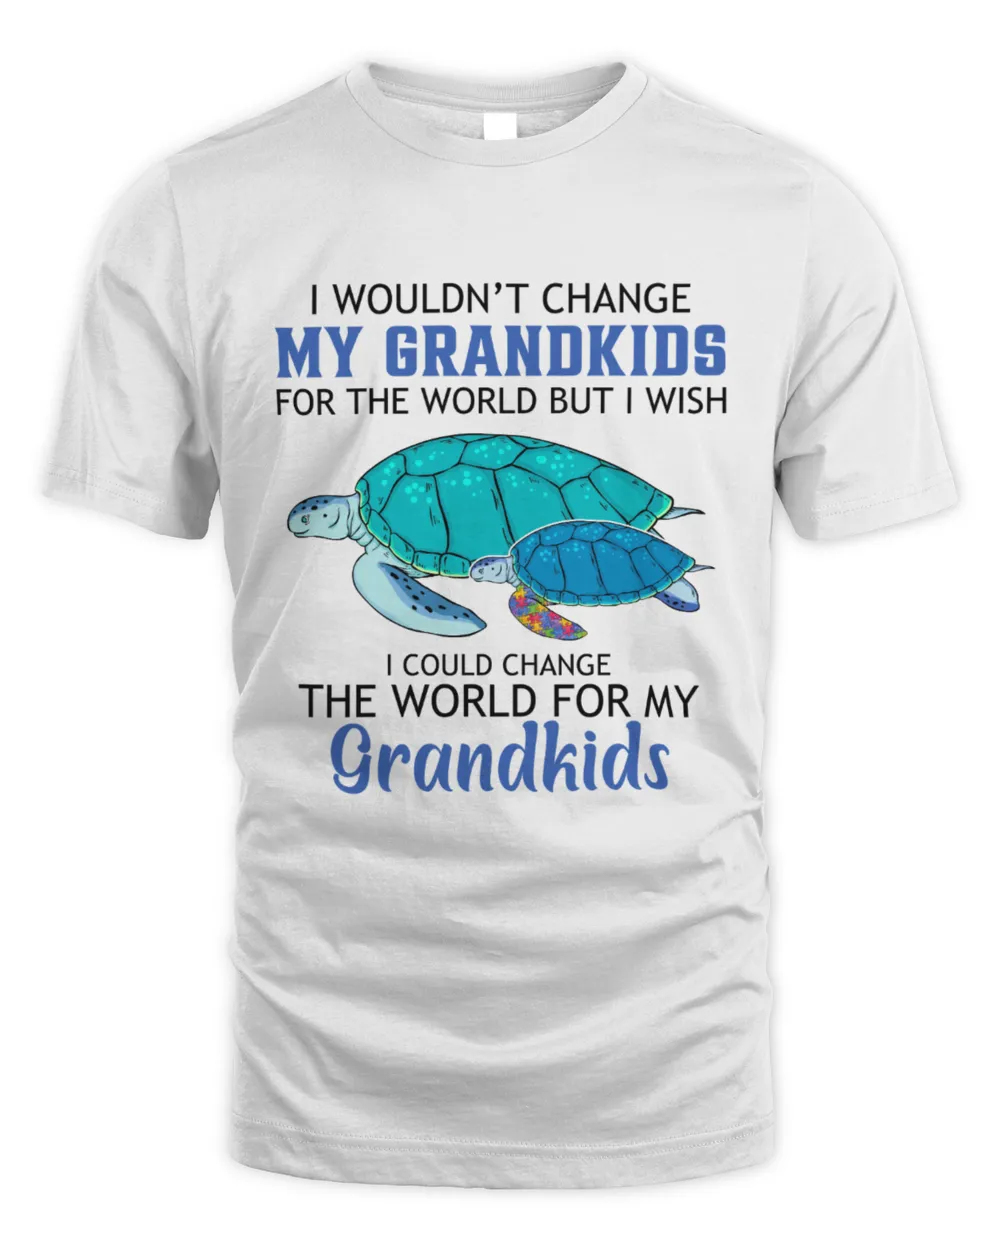 I wouldn't change my grandkids for the world | Grandma shirt, Nana shirt, Granny Shirt, Gramma Shirt, Mother Day Gift, Grandma Birthday Gift